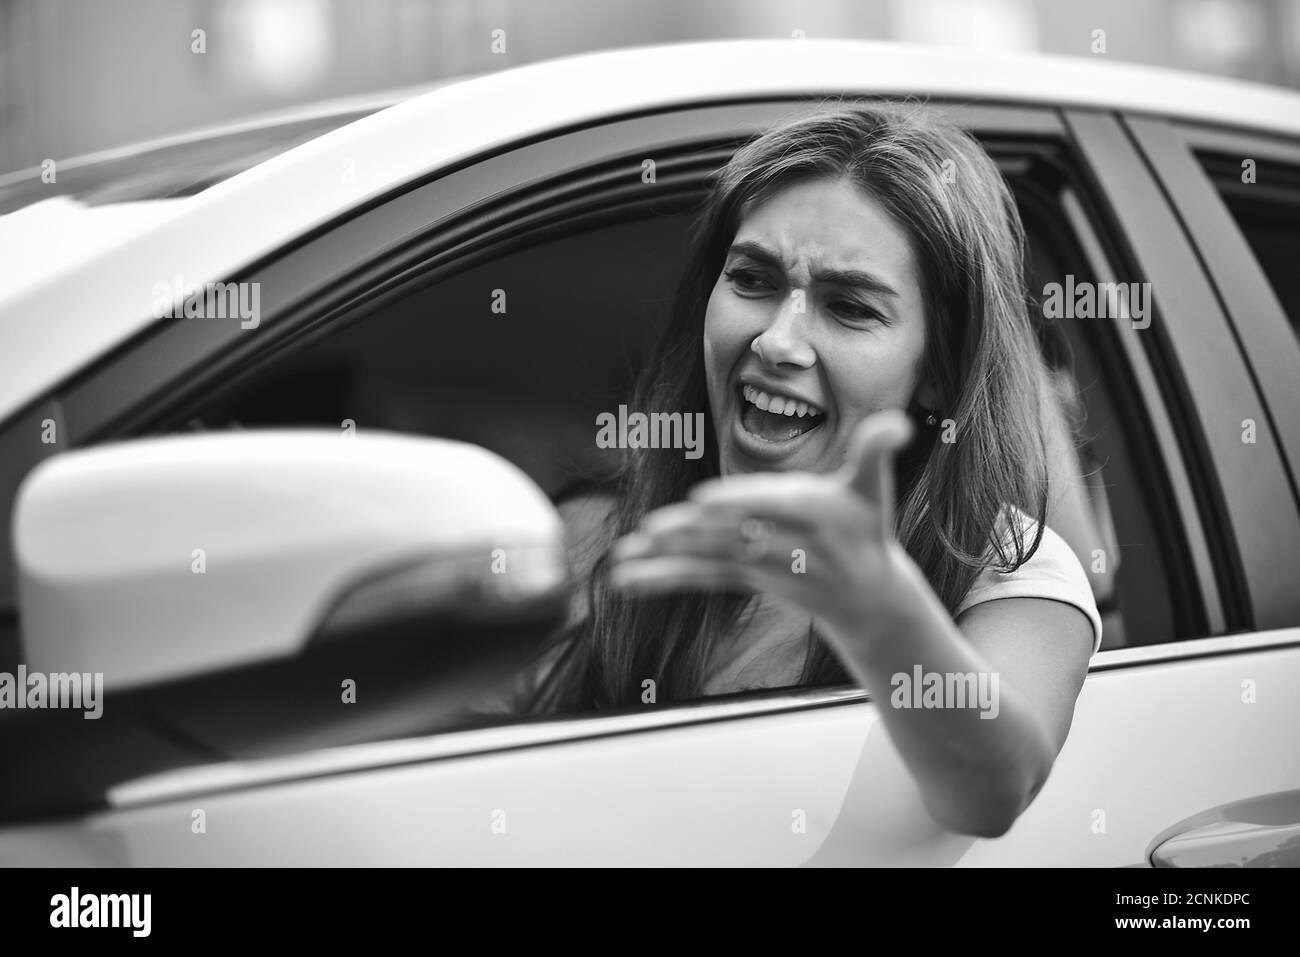 Young girl driving a car shocked about to have traffic accident, windshield view. Stock Photo